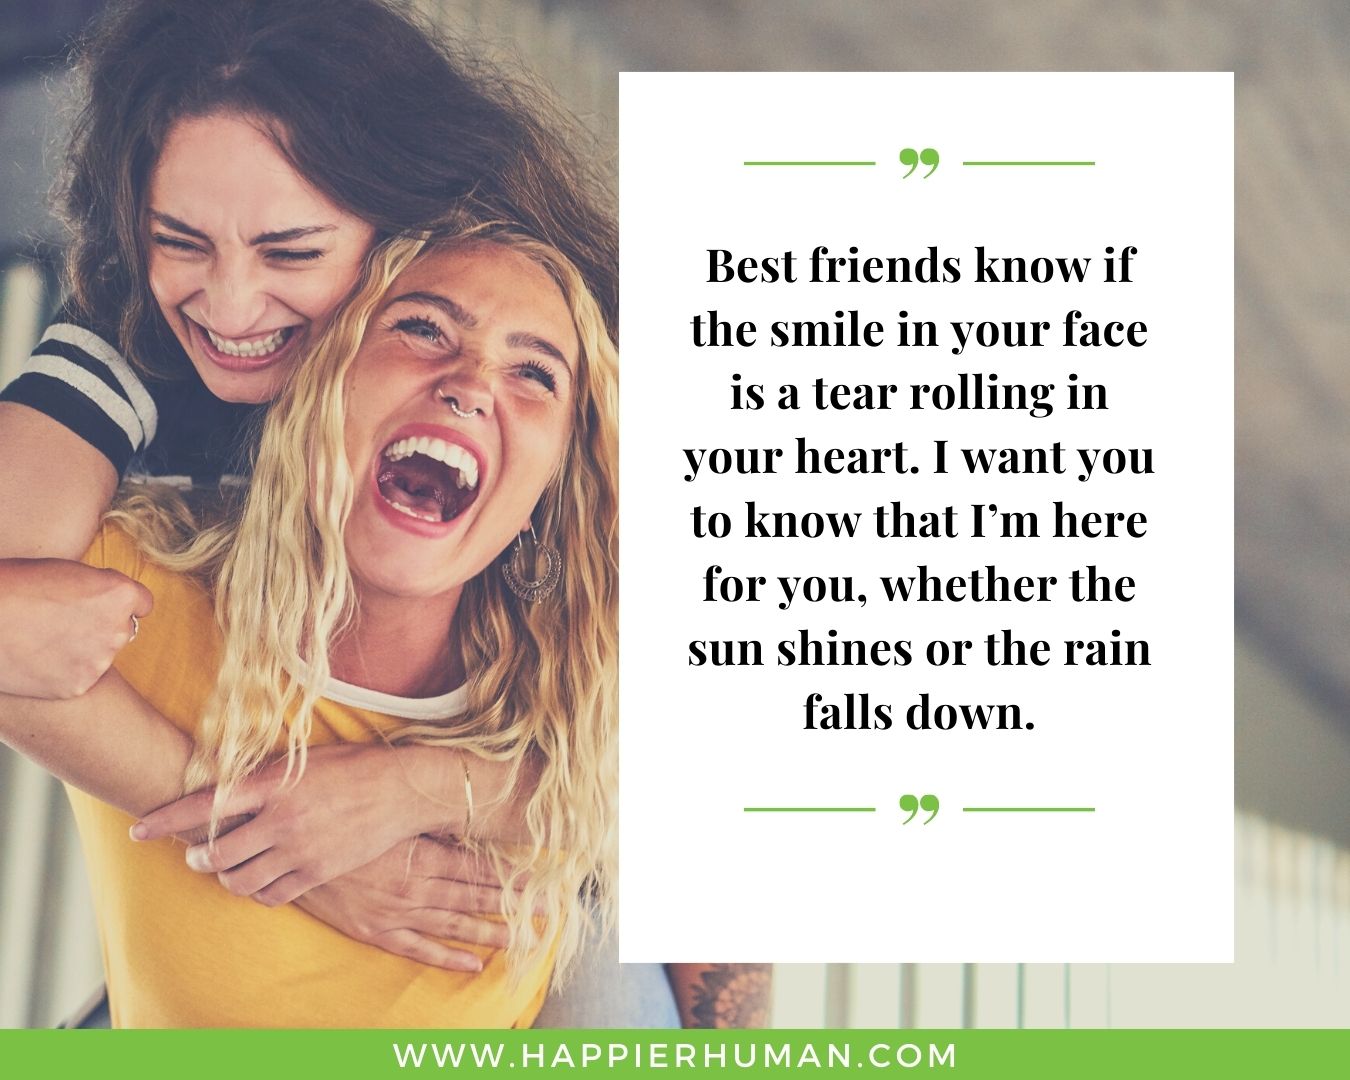 I’m Here for You Quotes - “Best friends know if the smile in your face is a tear rolling in your heart. I want you to know that I’m here for you, whether the sun shines or the rain falls down.”